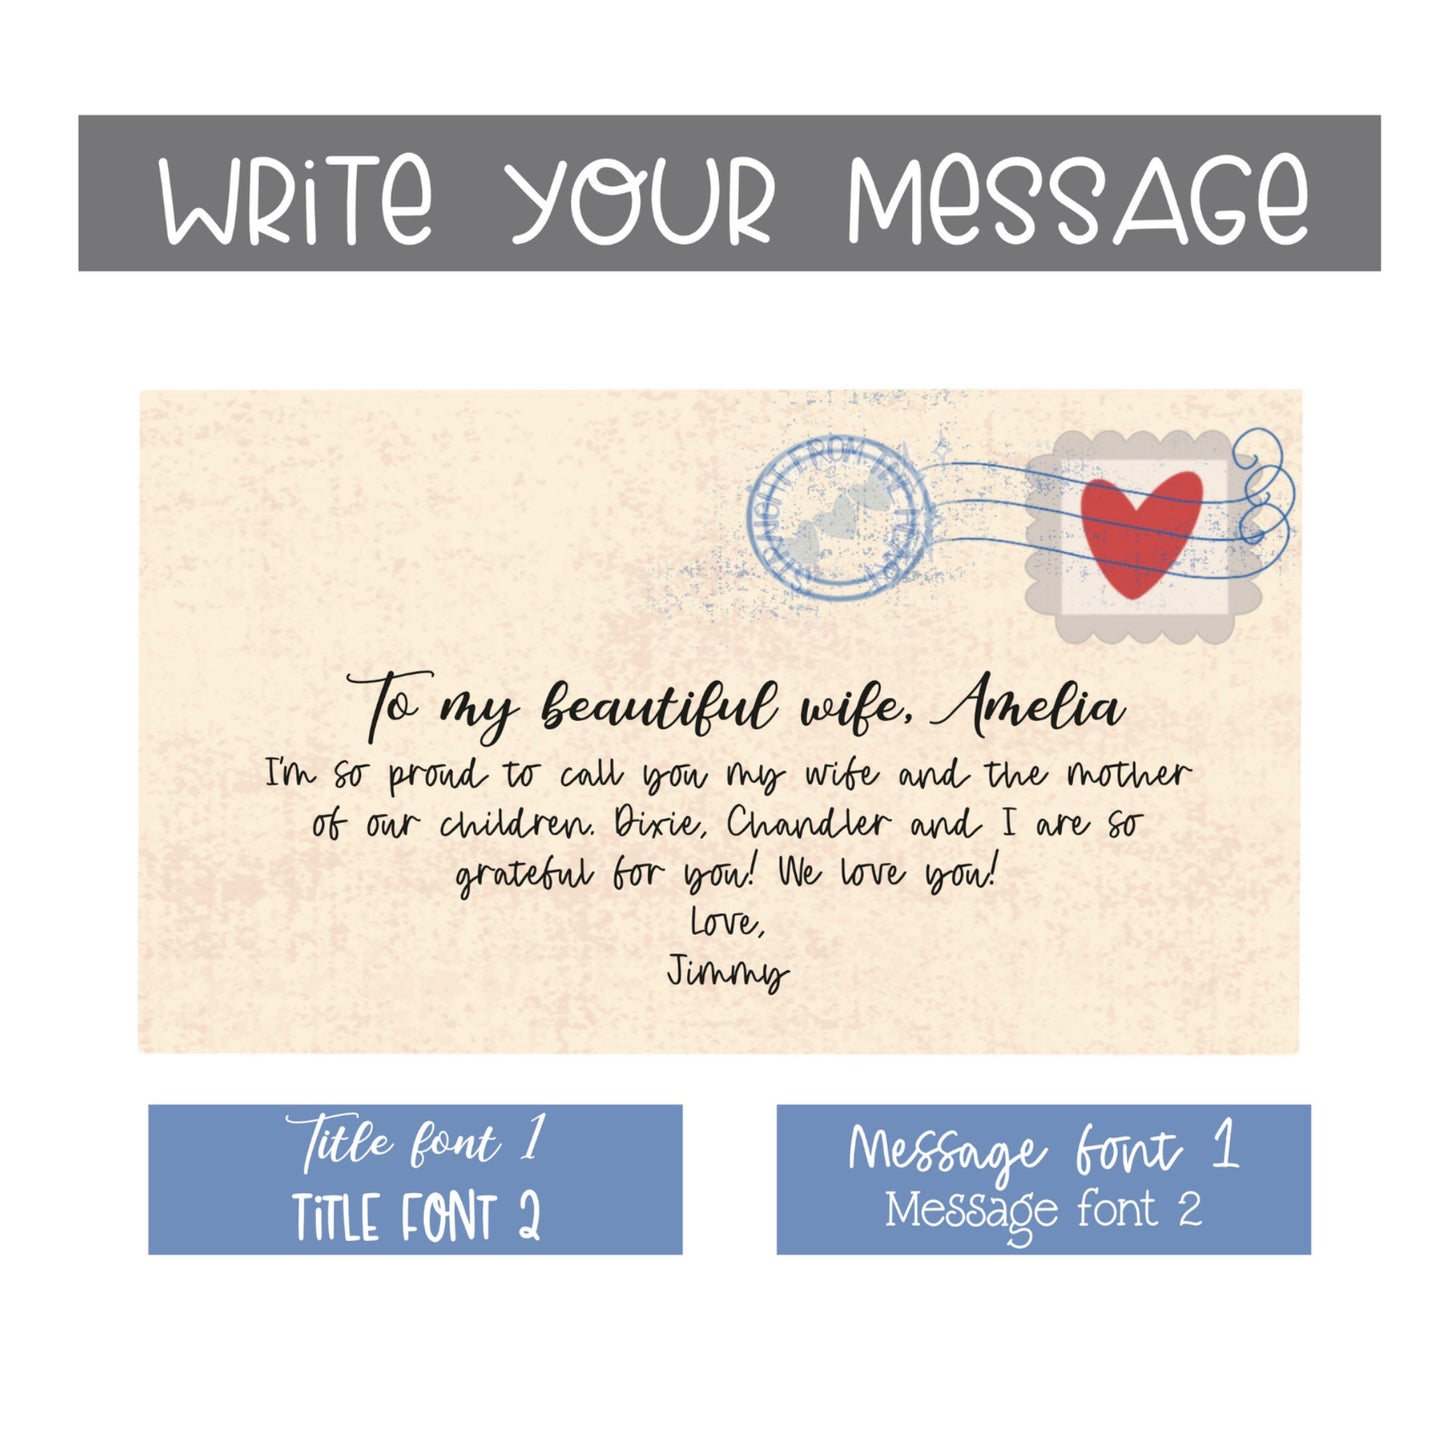 Write your message, example of the envelope, title, message and font options of the self-published personalized gift- a children’s picture book called “I’m Your Mommy”